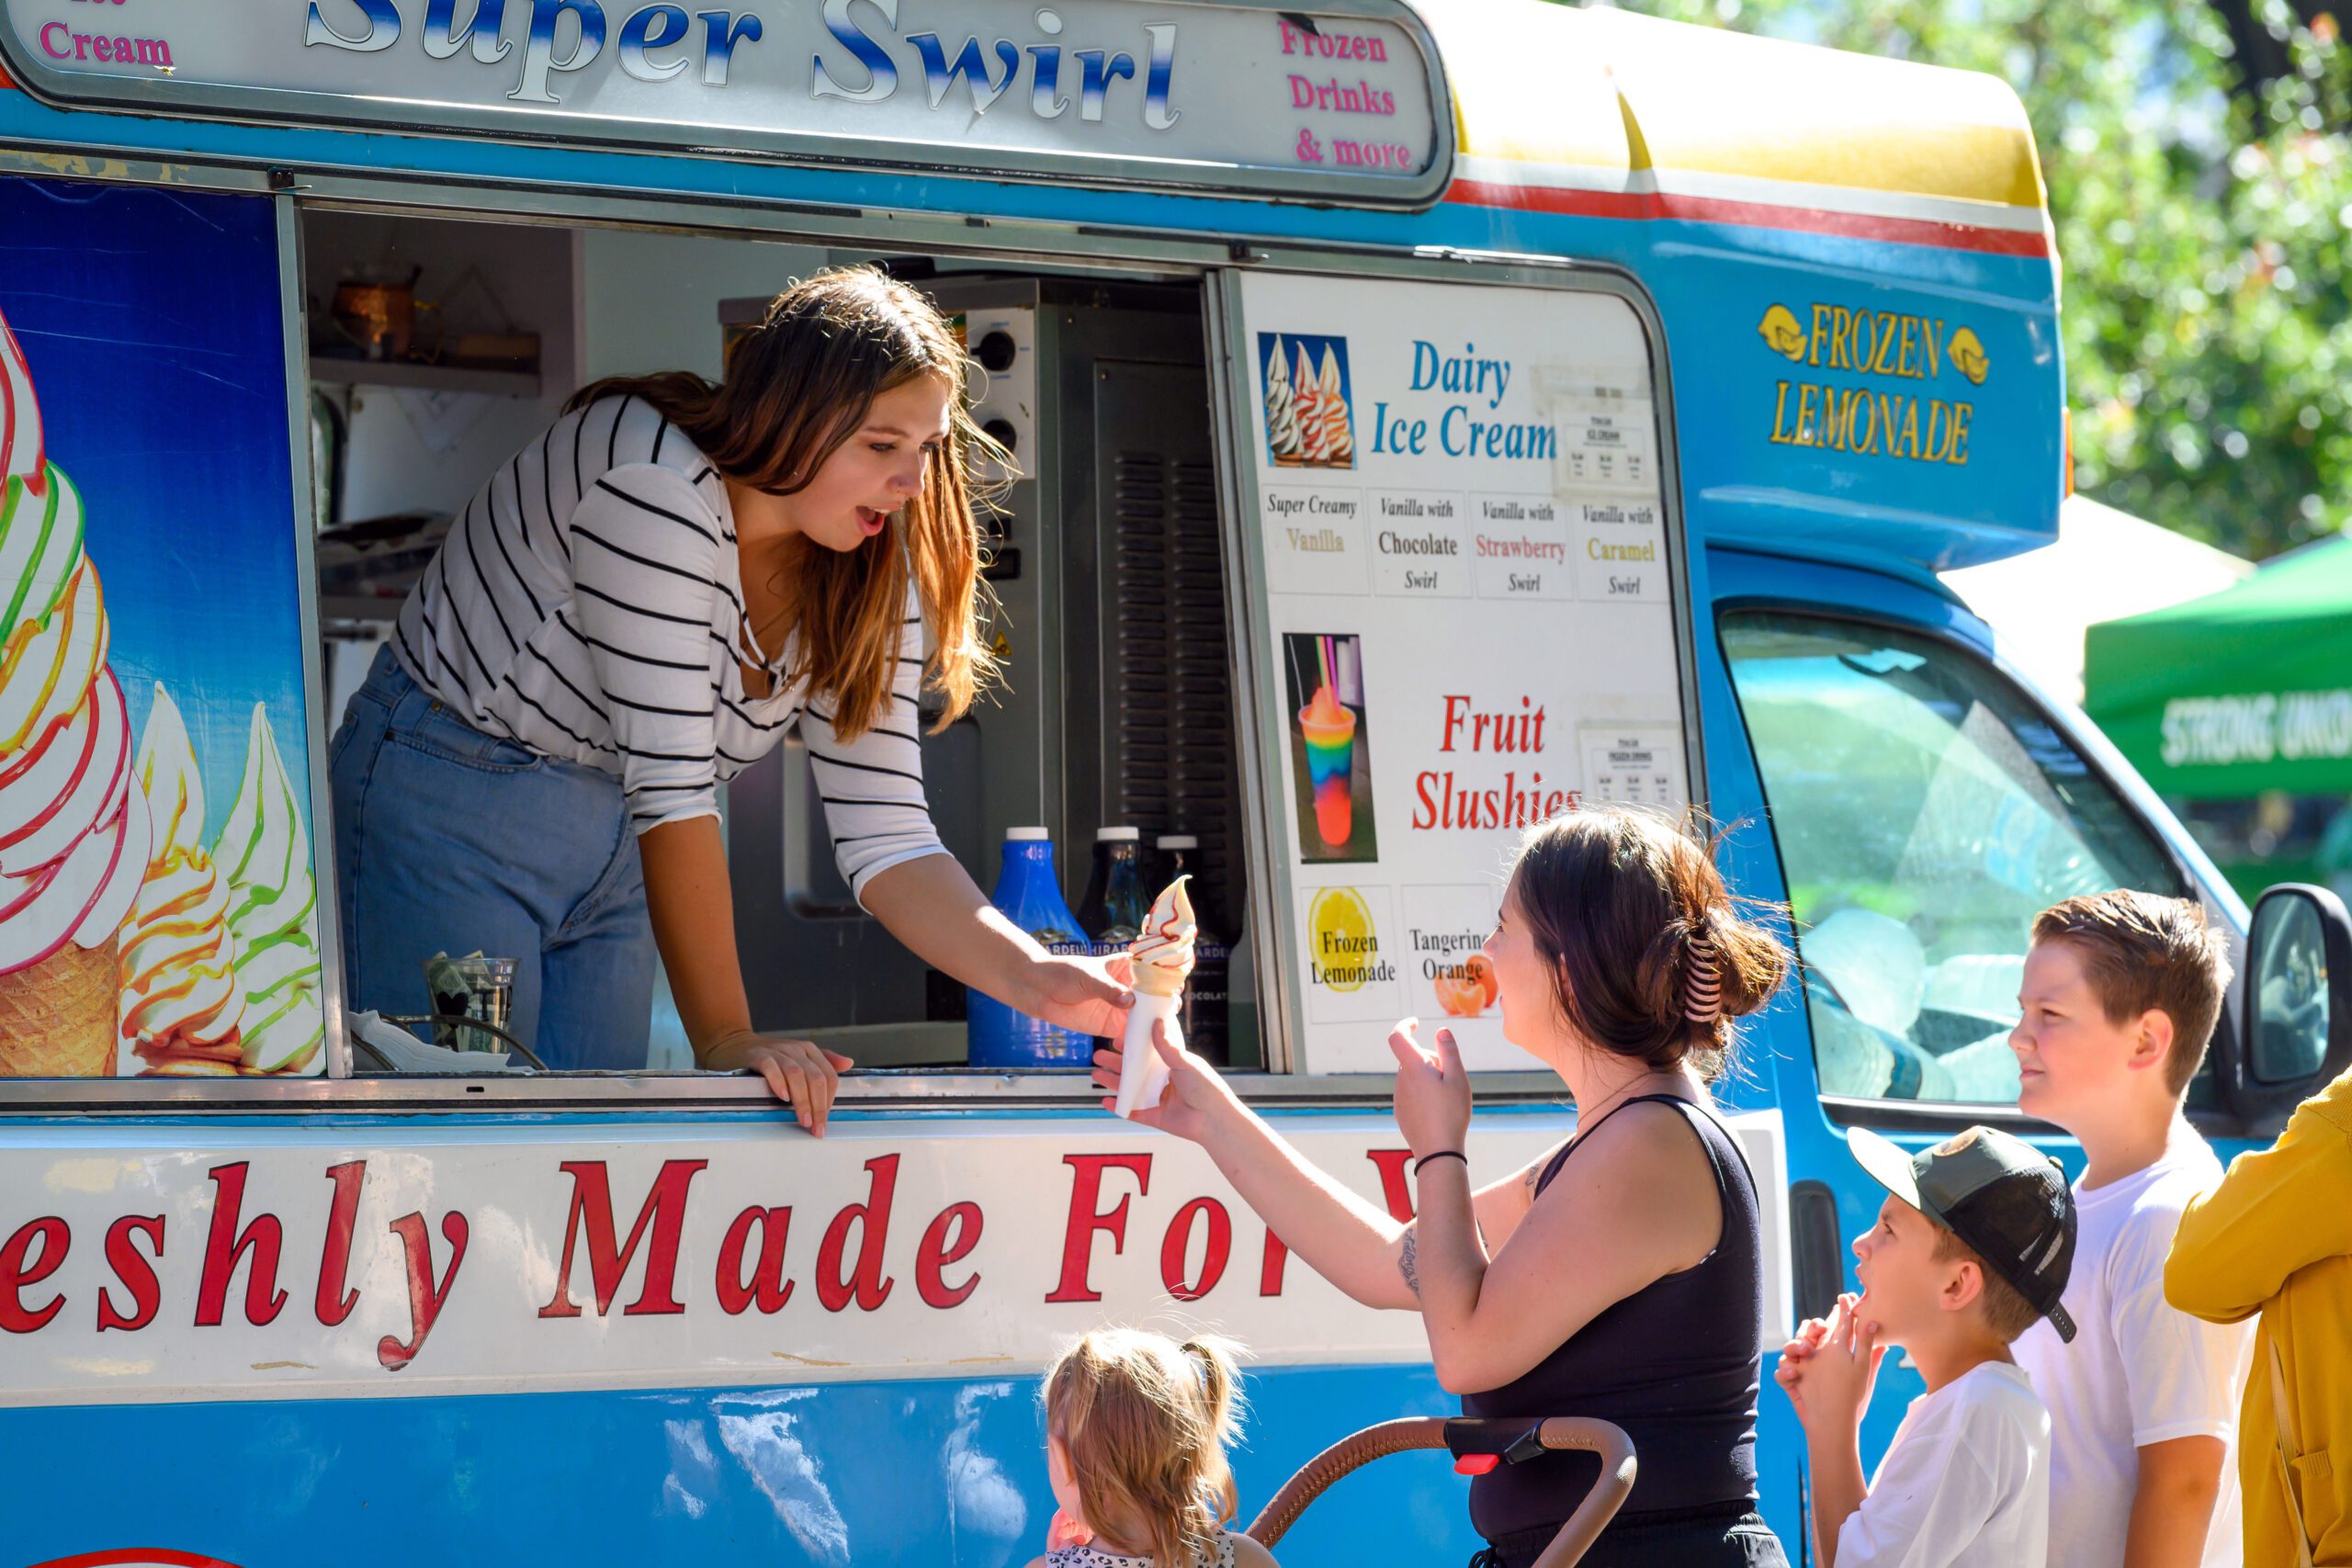 Woman in ice cream truck hands ice cream to people